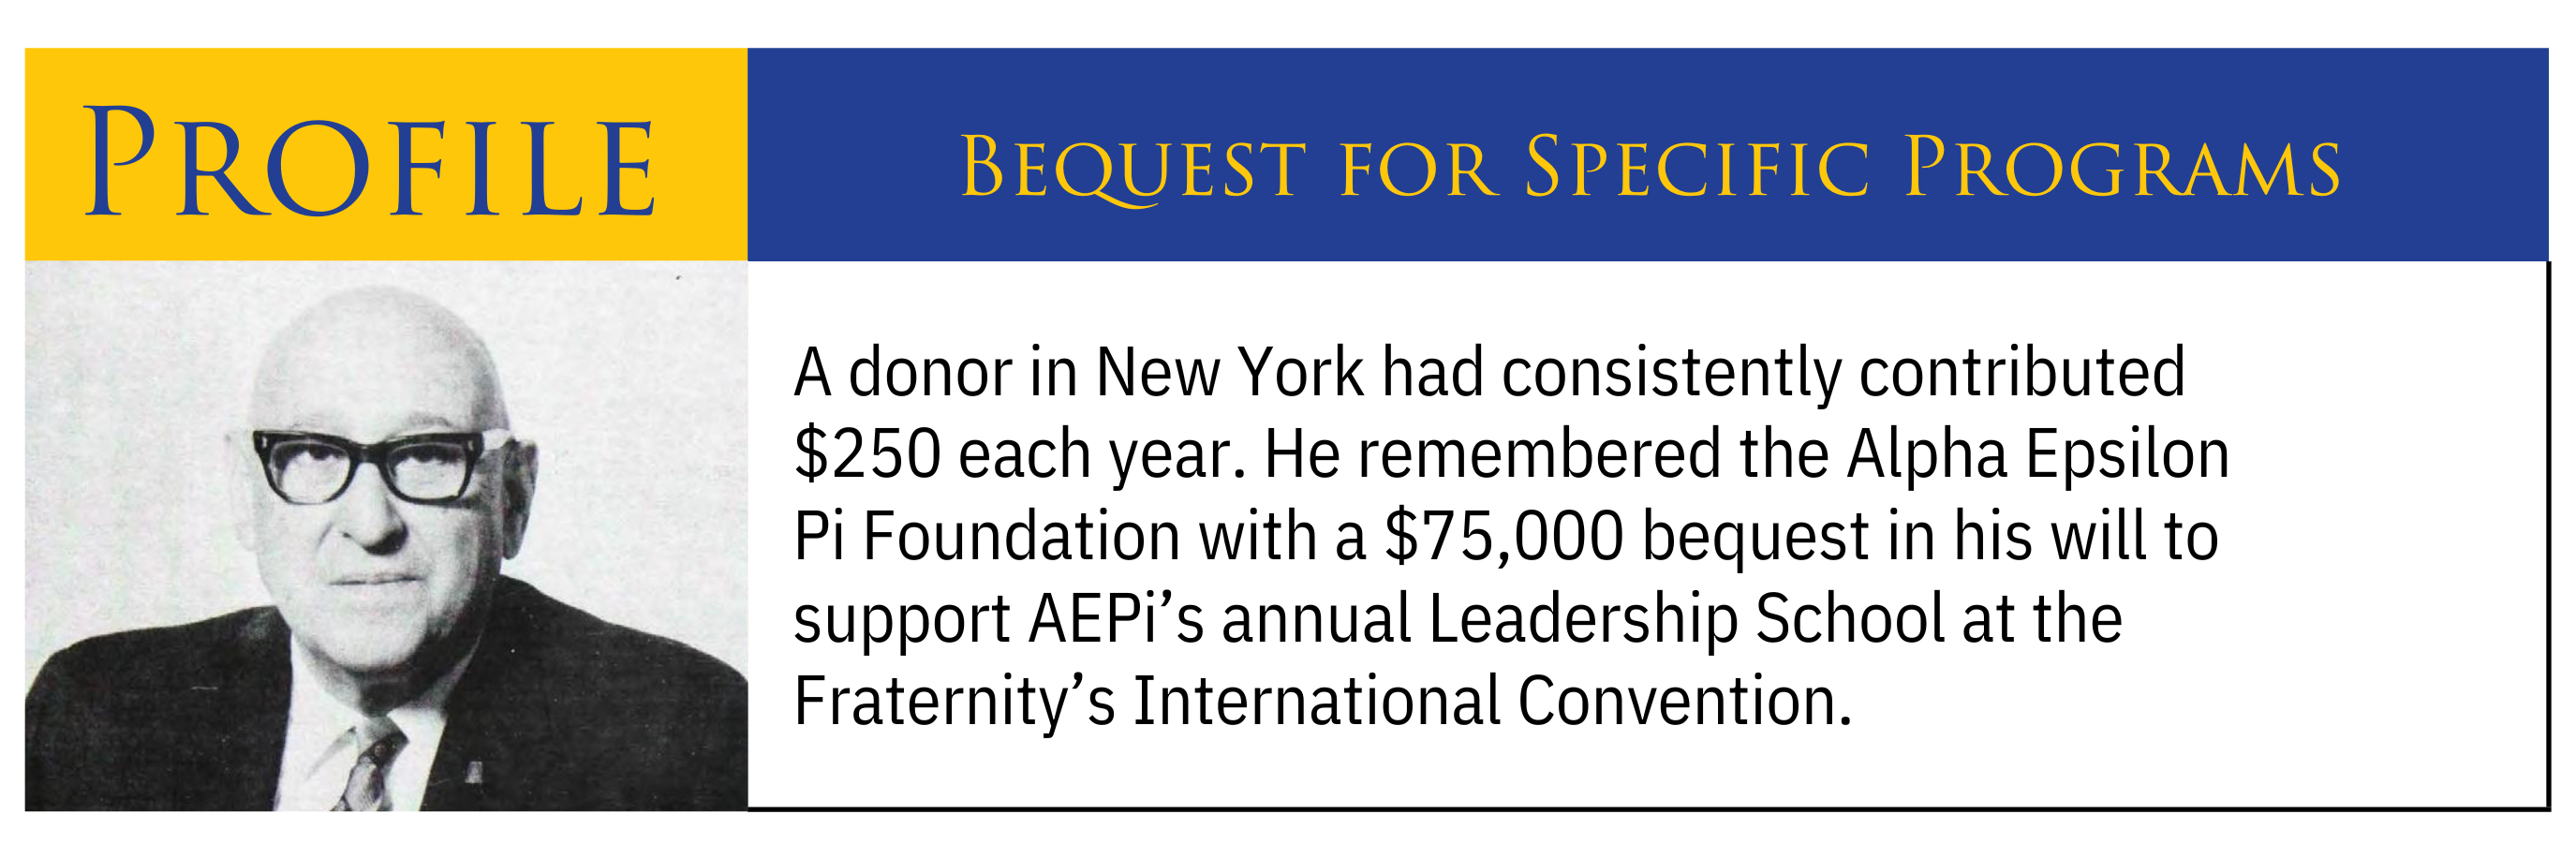 “I already make an annual gift, but in honor of AEPi’s new Legacy Campaign I have made an additional 5-year pledge to help support new Foundation initiatives.” — AEPi Alumnus in Atlanta, GA-4